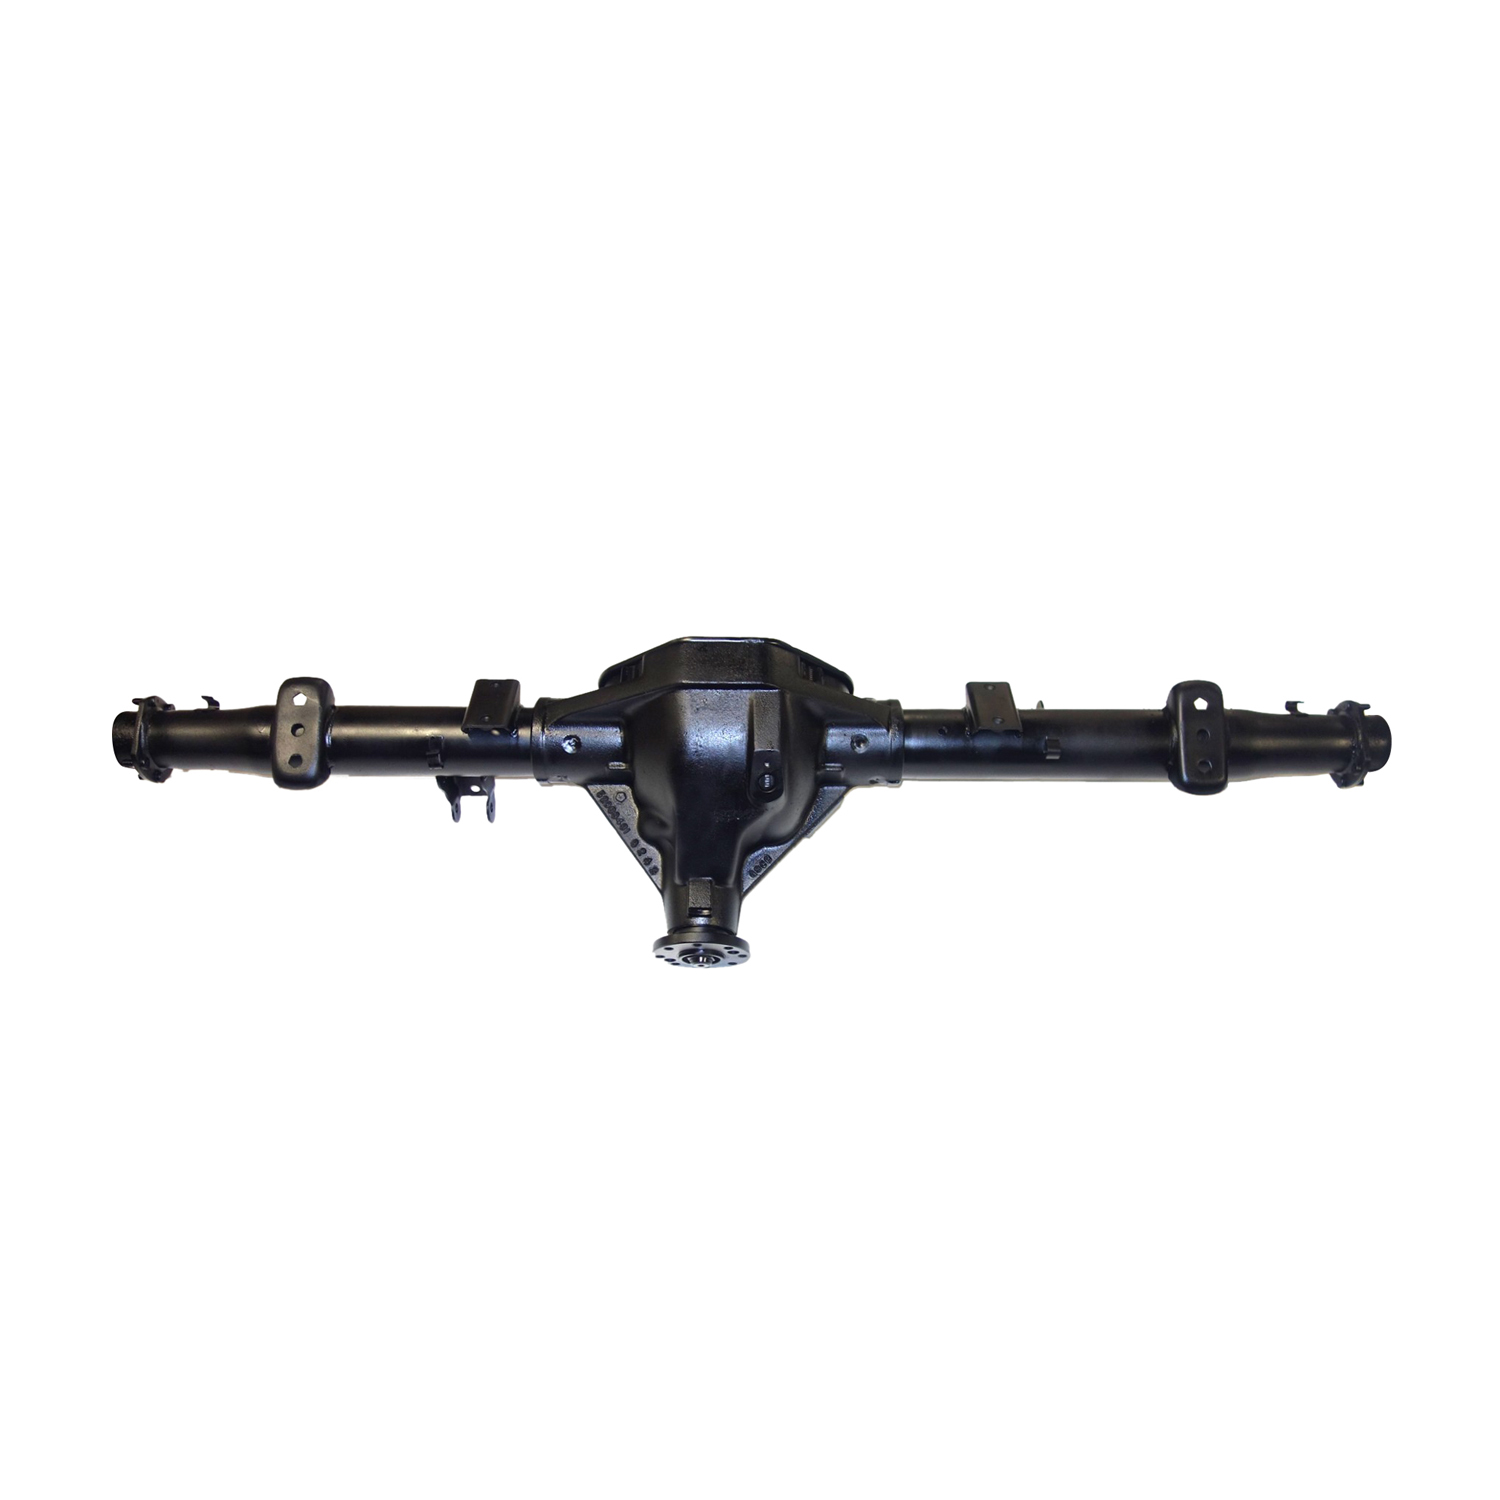 Remanufactured Axle Assy Chy 9.25" 04-05 Durango 3.92 , 4x4 w/ Traction Control, Posi LSD